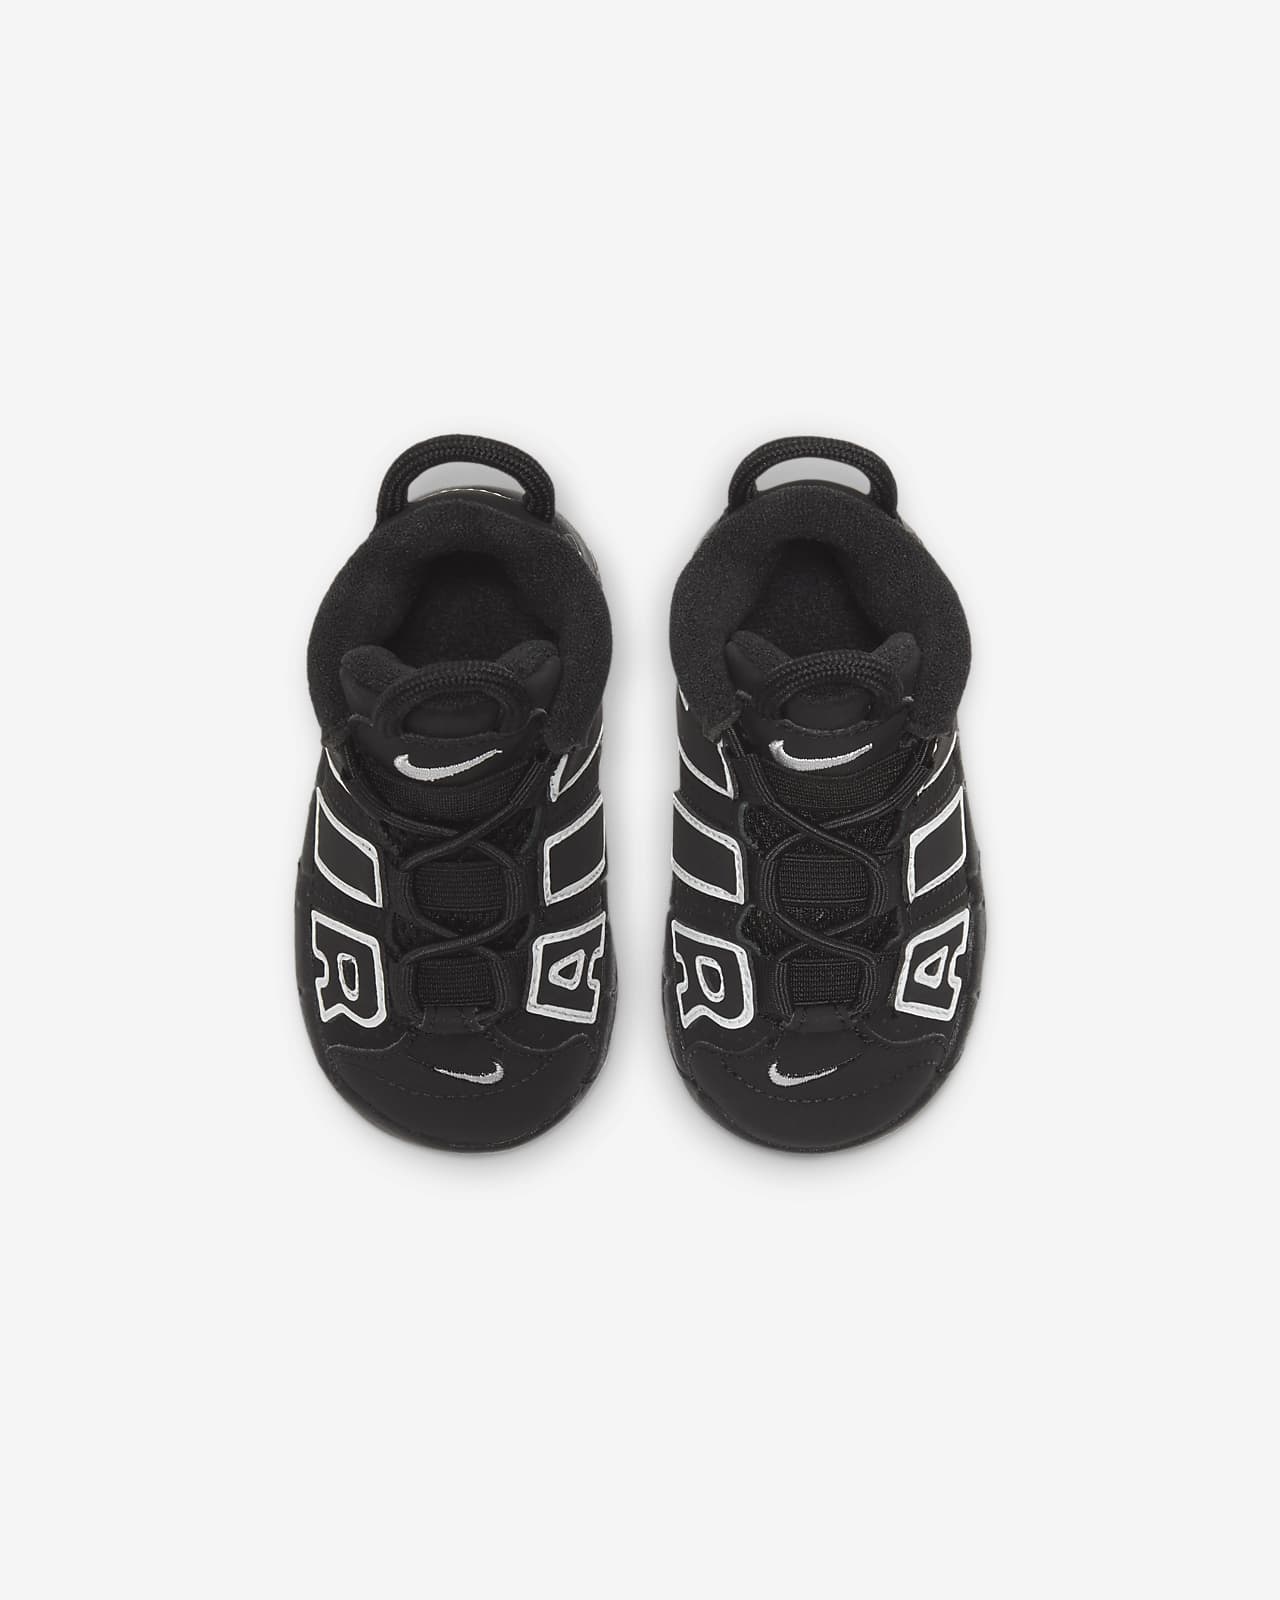 Nike Air More Uptempo Baby/Toddler Shoe 